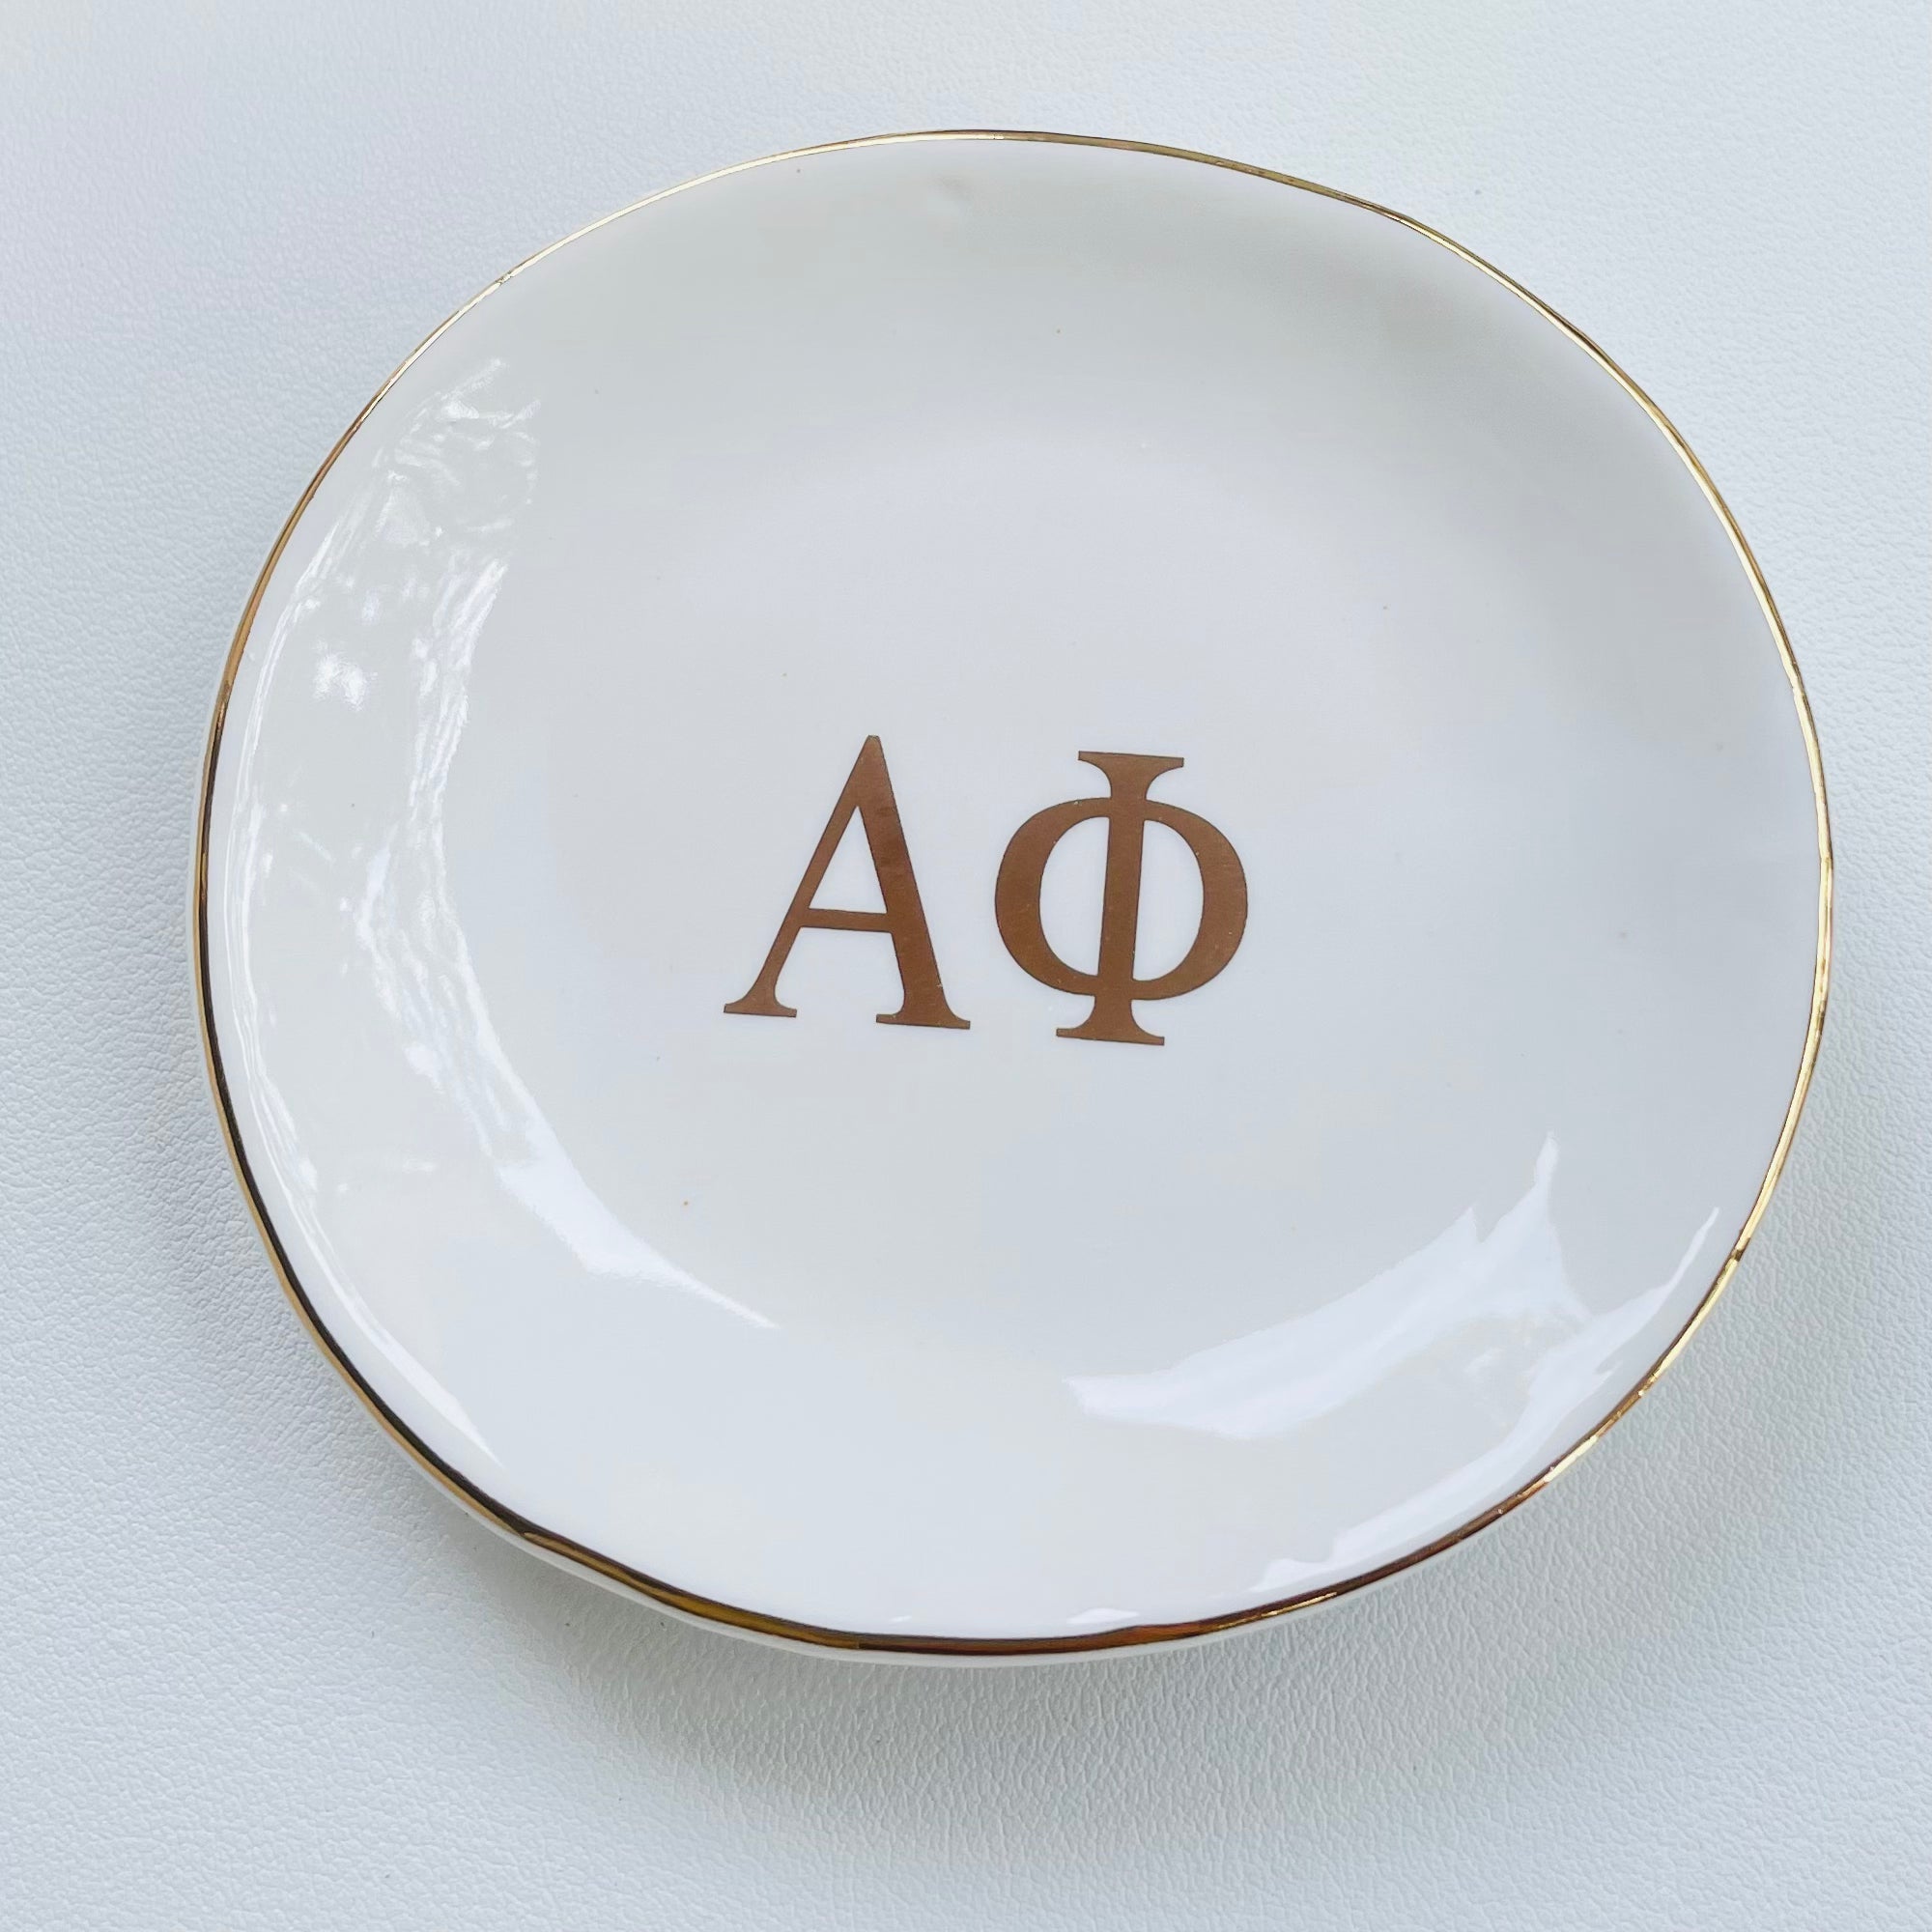 Alpha Phi Sorority Ring Dish with gold trim